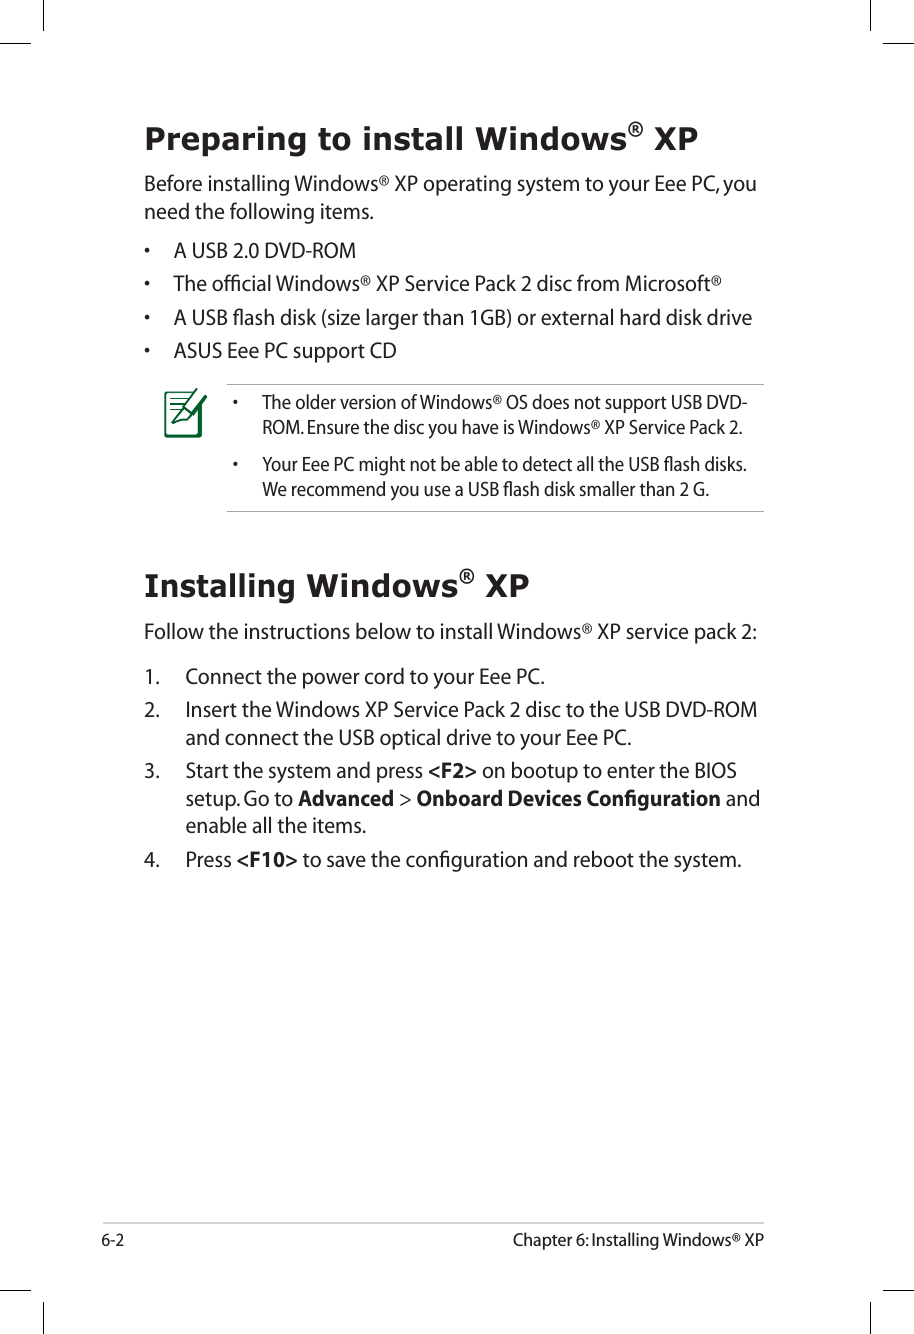 6-2Chapter 6: Installing Windows® XPPreparing to install Windows® XPBefore installing Windows® XP operating system to your Eee PC, you need the following items.•  A USB 2.0 DVD-ROM•  The ofﬁcial Windows® XP Service Pack 2 disc from Microsoft®•  A USB ﬂash disk (size larger than 1GB) or external hard disk drive•  ASUS Eee PC support CD•  The older version of Windows® OS does not support USB DVD-ROM. Ensure the disc you have is Windows® XP Service Pack 2.•  Your Eee PC might not be able to detect all the USB ﬂash disks. We recommend you use a USB ﬂash disk smaller than 2 G. Installing Windows® XPFollow the instructions below to install Windows® XP service pack 2:1.  Connect the power cord to your Eee PC.2.  Insert the Windows XP Service Pack 2 disc to the USB DVD-ROM and connect the USB optical drive to your Eee PC.3.  Start the system and press &lt;F2&gt; on bootup to enter the BIOS setup. Go to Advanced &gt; Onboard Devices Conﬁguration and enable all the items.4.  Press &lt;F10&gt; to save the conﬁguration and reboot the system.